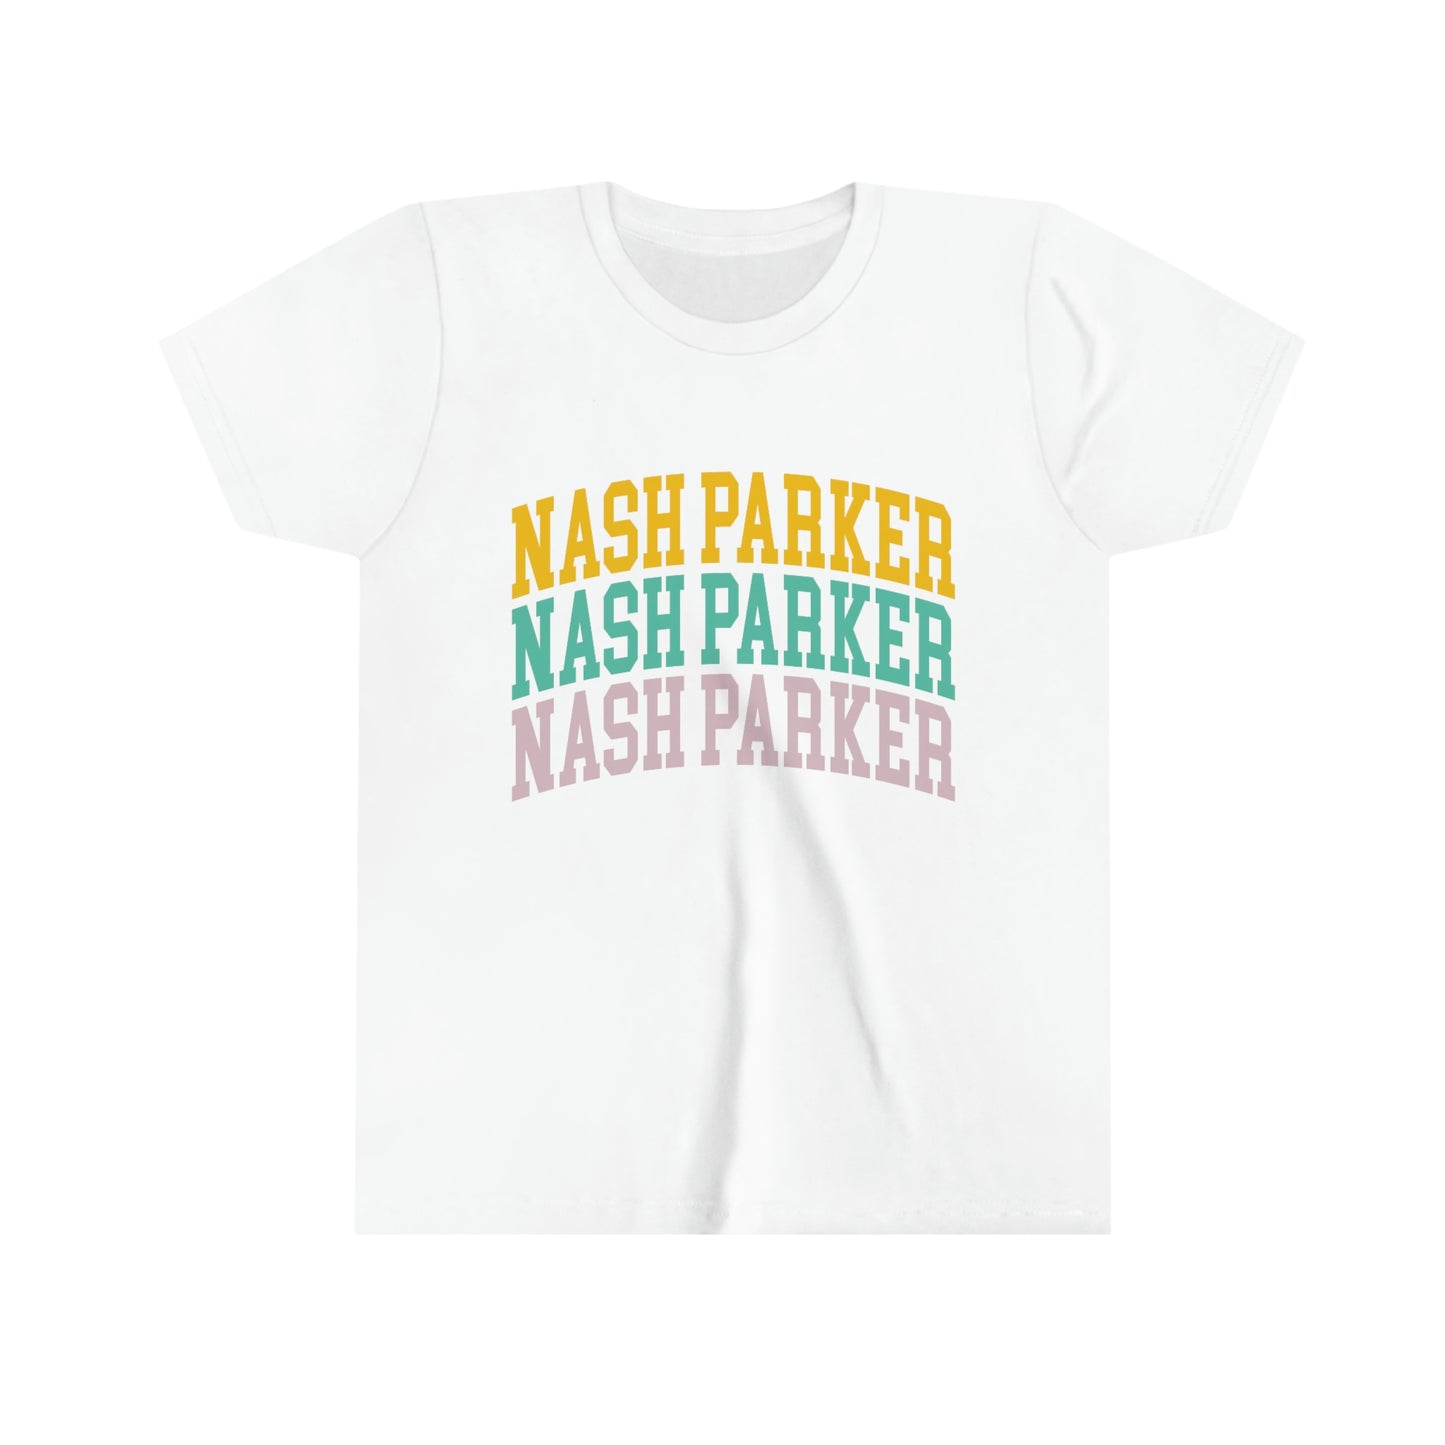 Youth "Nash Parker Spellout" Short Sleeve Tee